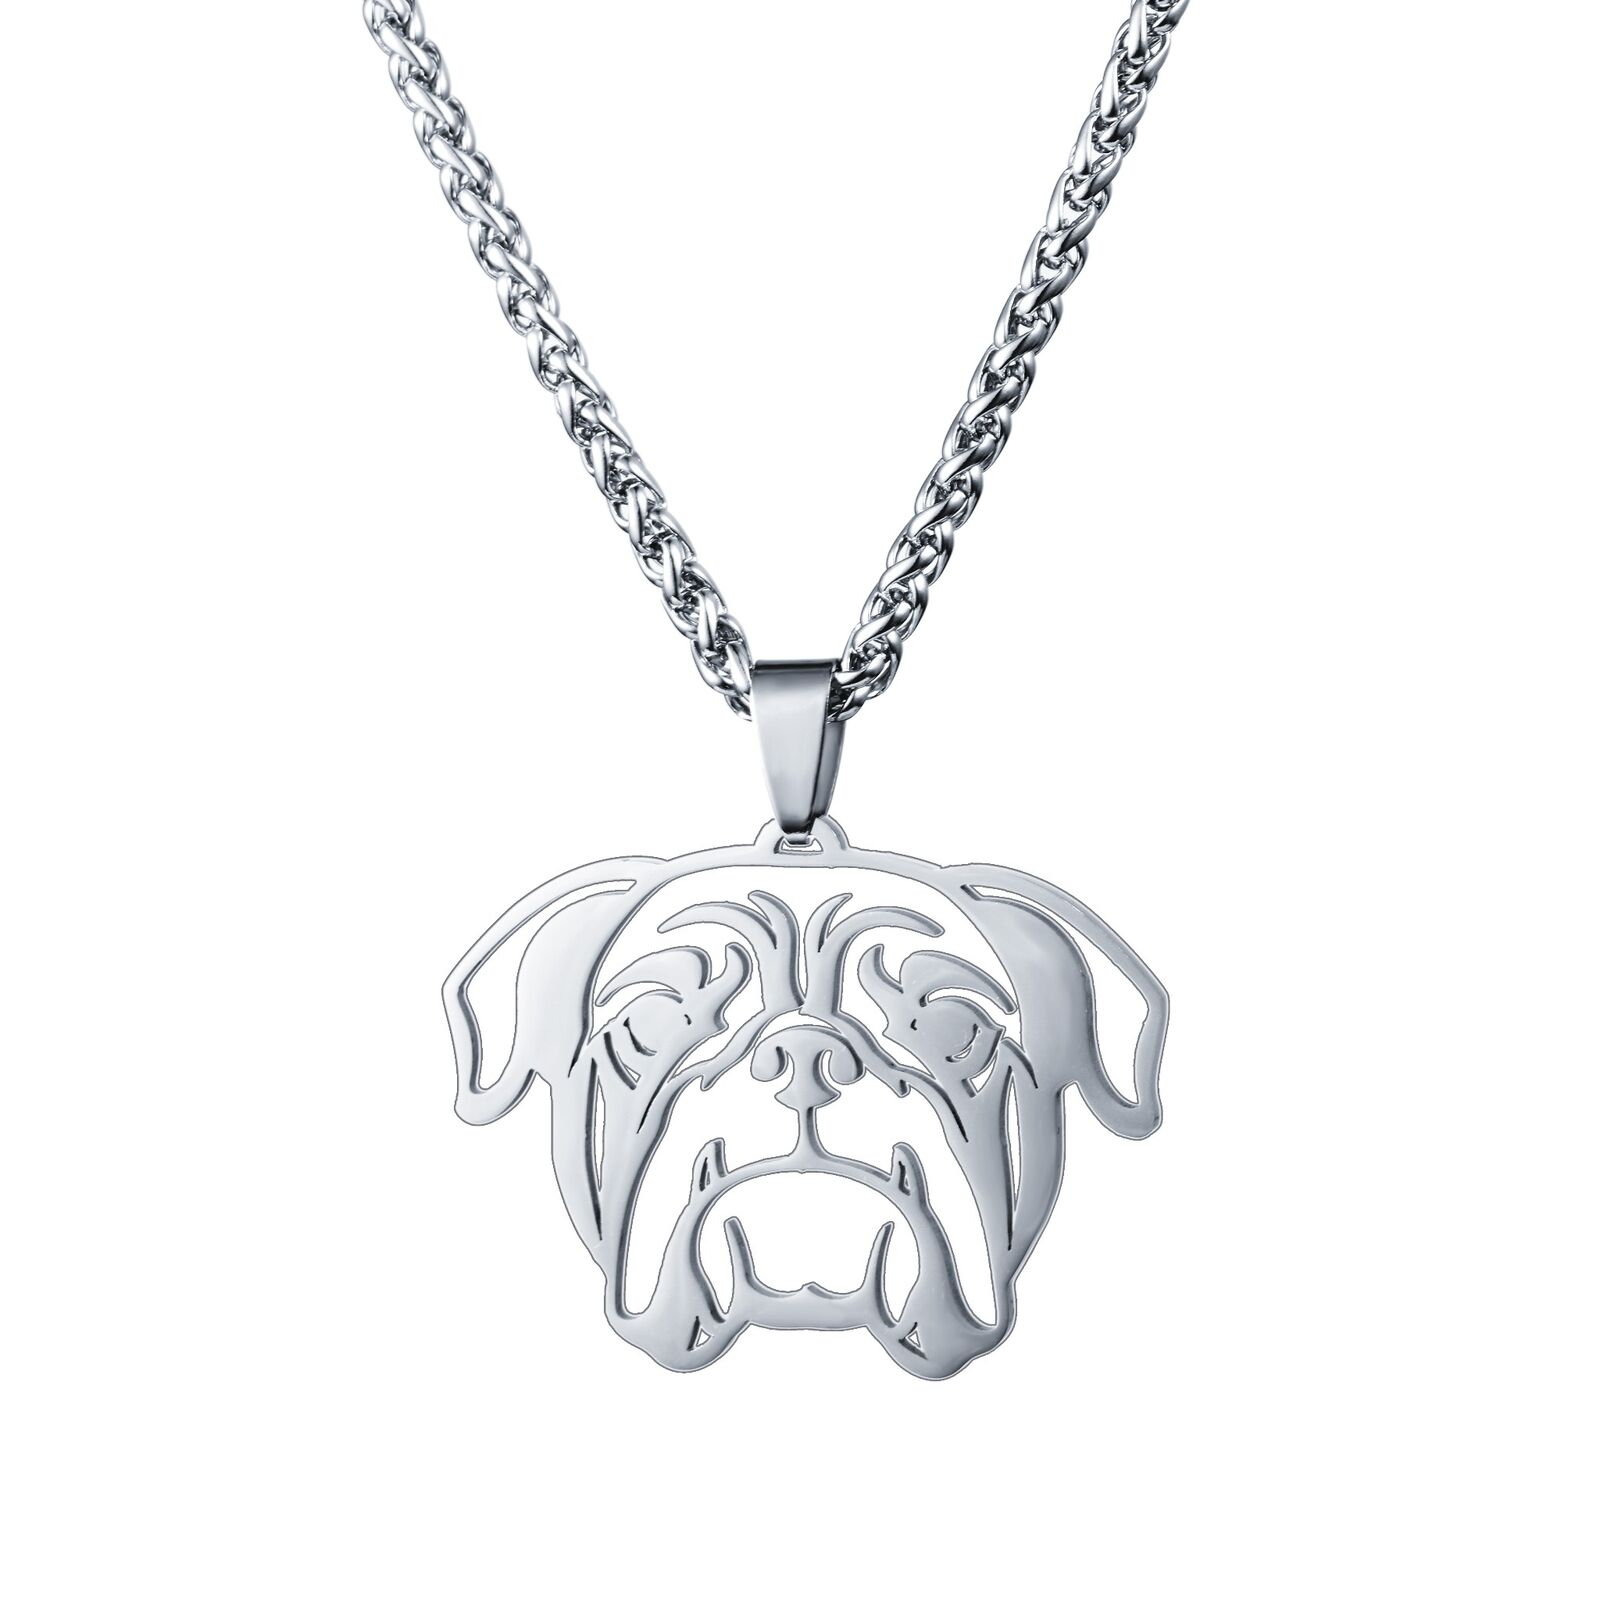 NEW Stainless Steel American English Bull Bulldog Dog Tag Charm Pendant Necklace